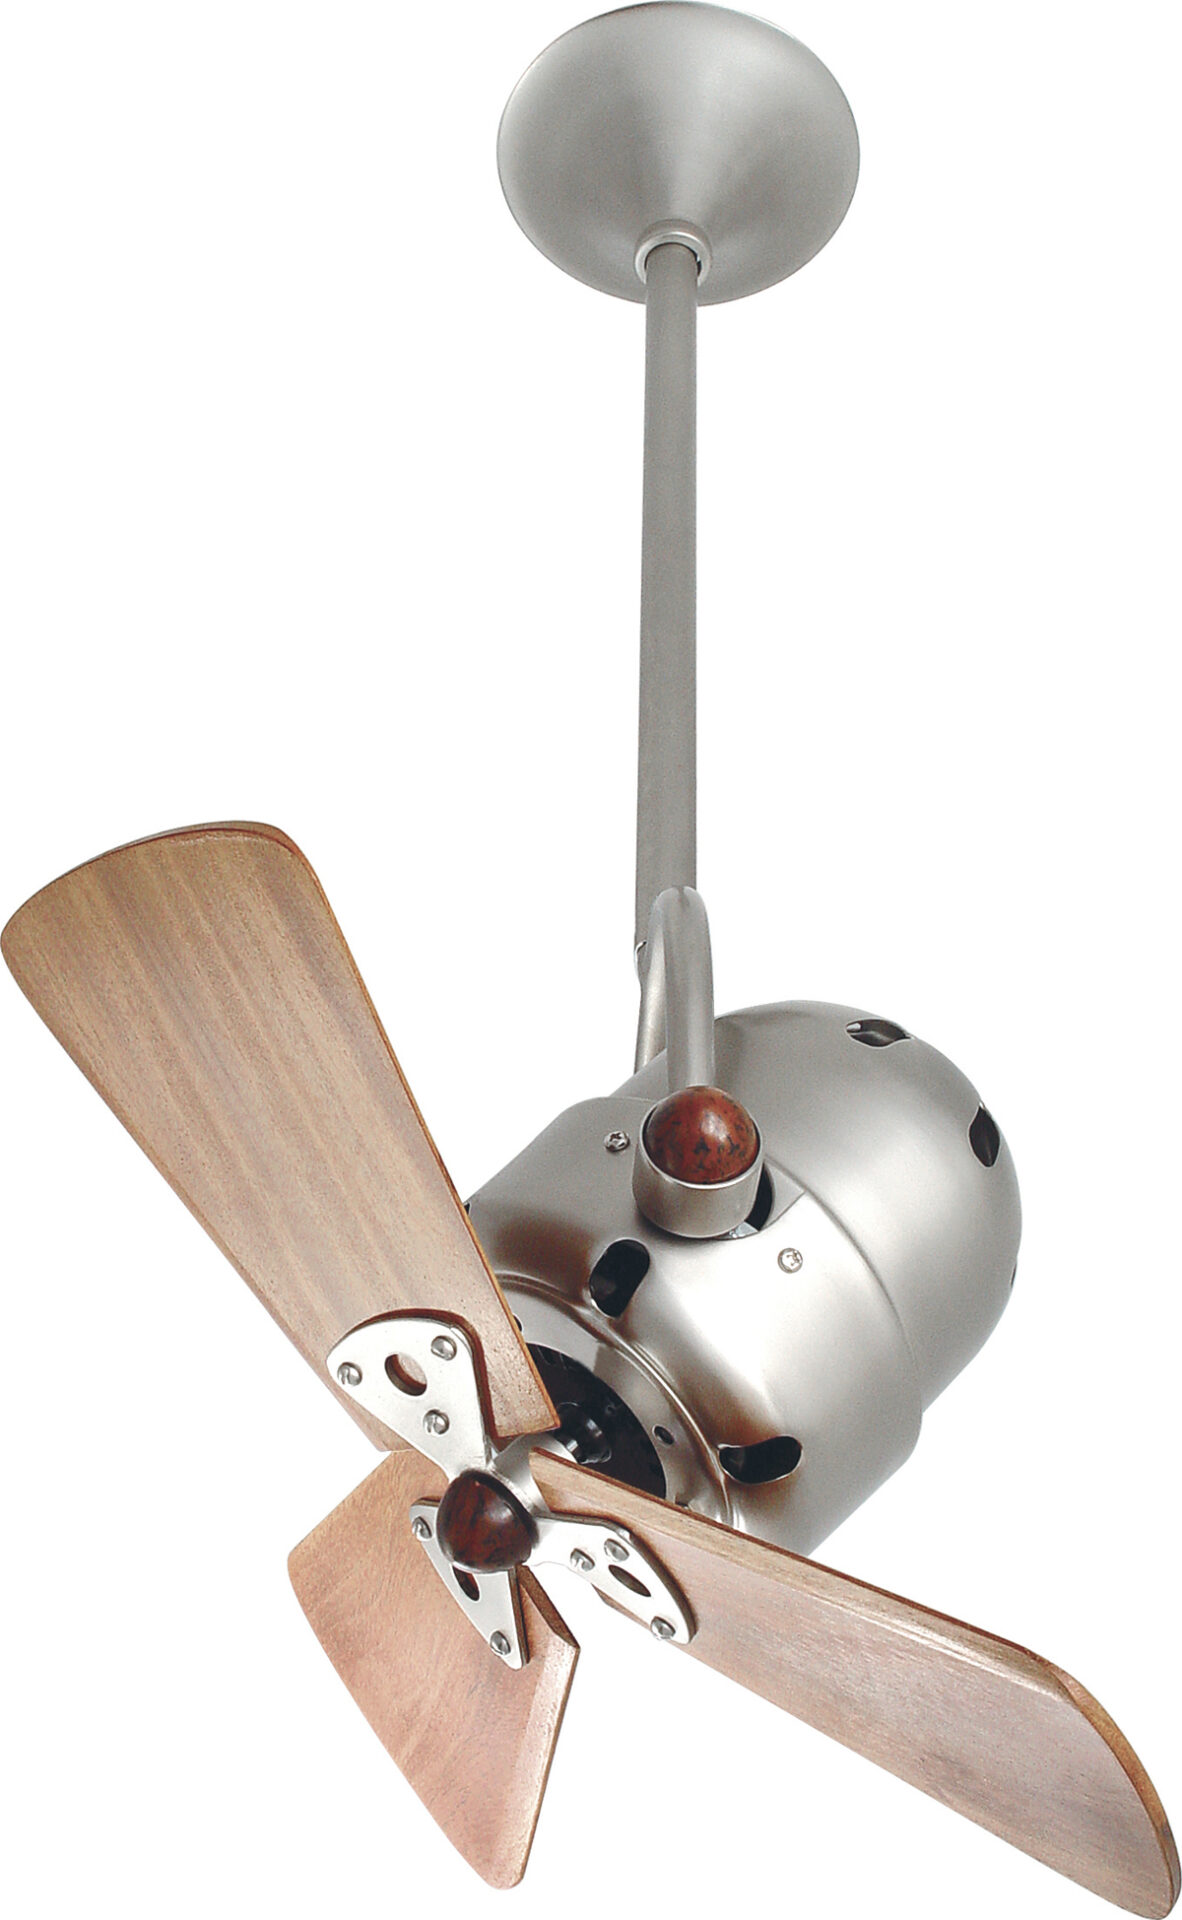 Bianca Direcional Ceiling Fan in Brushed Nickel with Mahogany Wood Blades